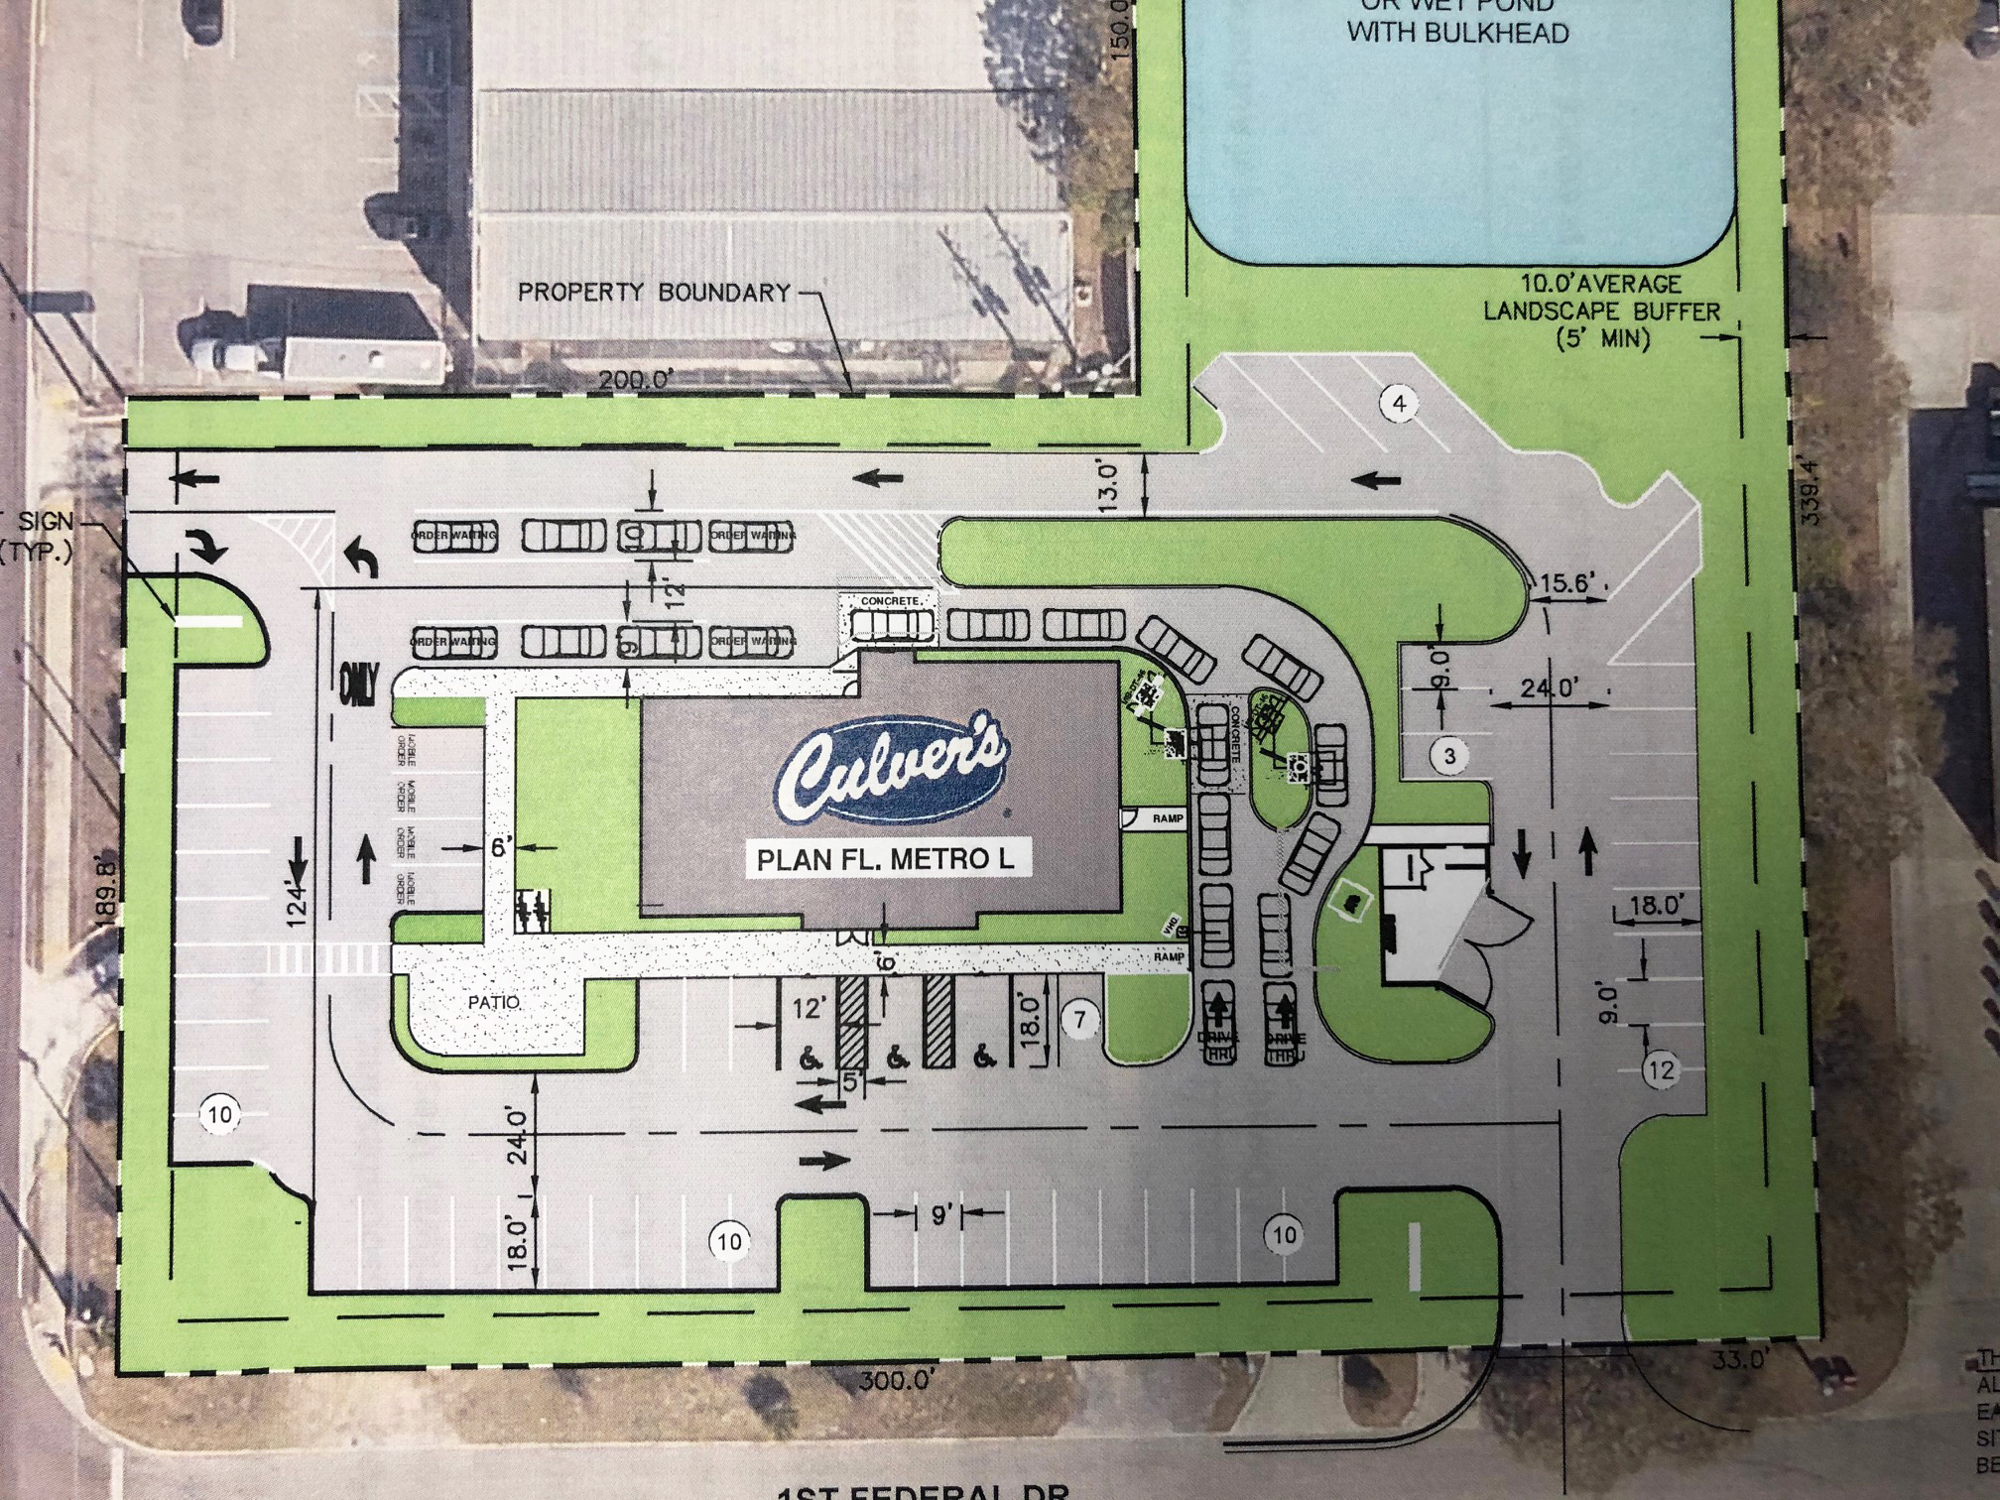 The site plan for the Regency Culver's.